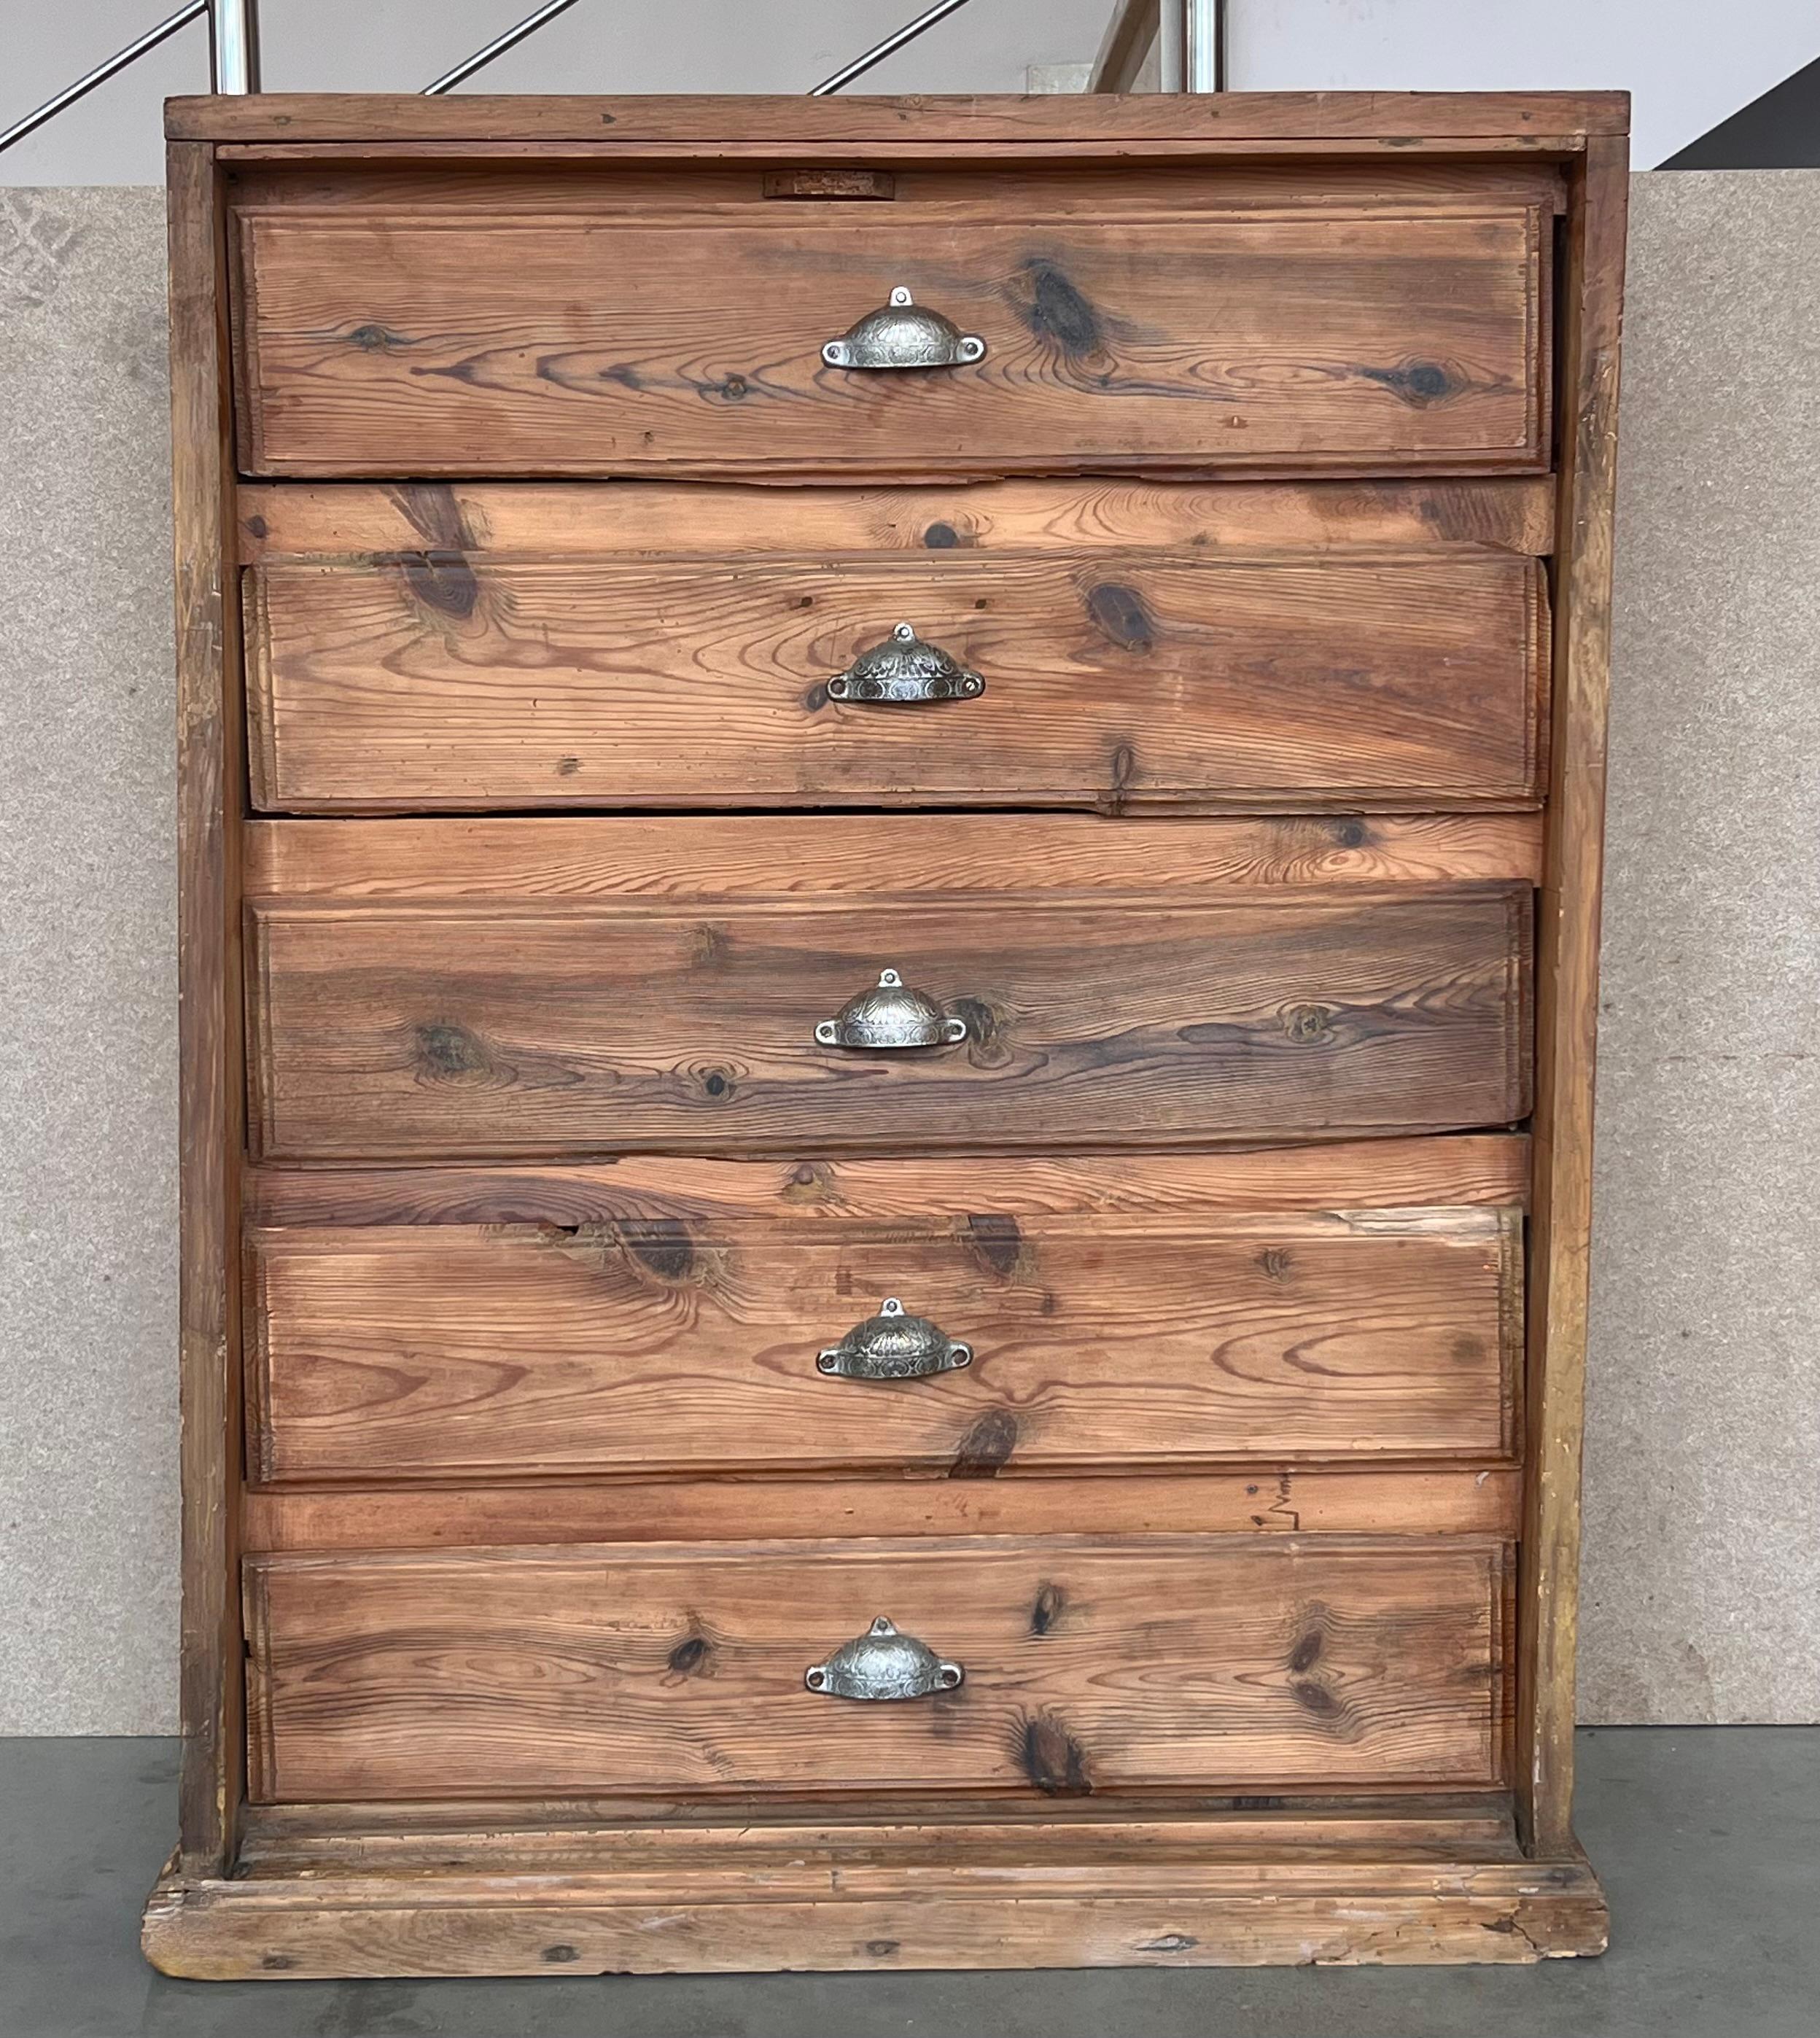 A lovely tall chest of drawers in pine with lift-top in pedestal form, followed by five drawers with nickel-plated key plates. The top and bottom drawer have a shaped profile while the middle section is flanked by half-turned columns. The chest